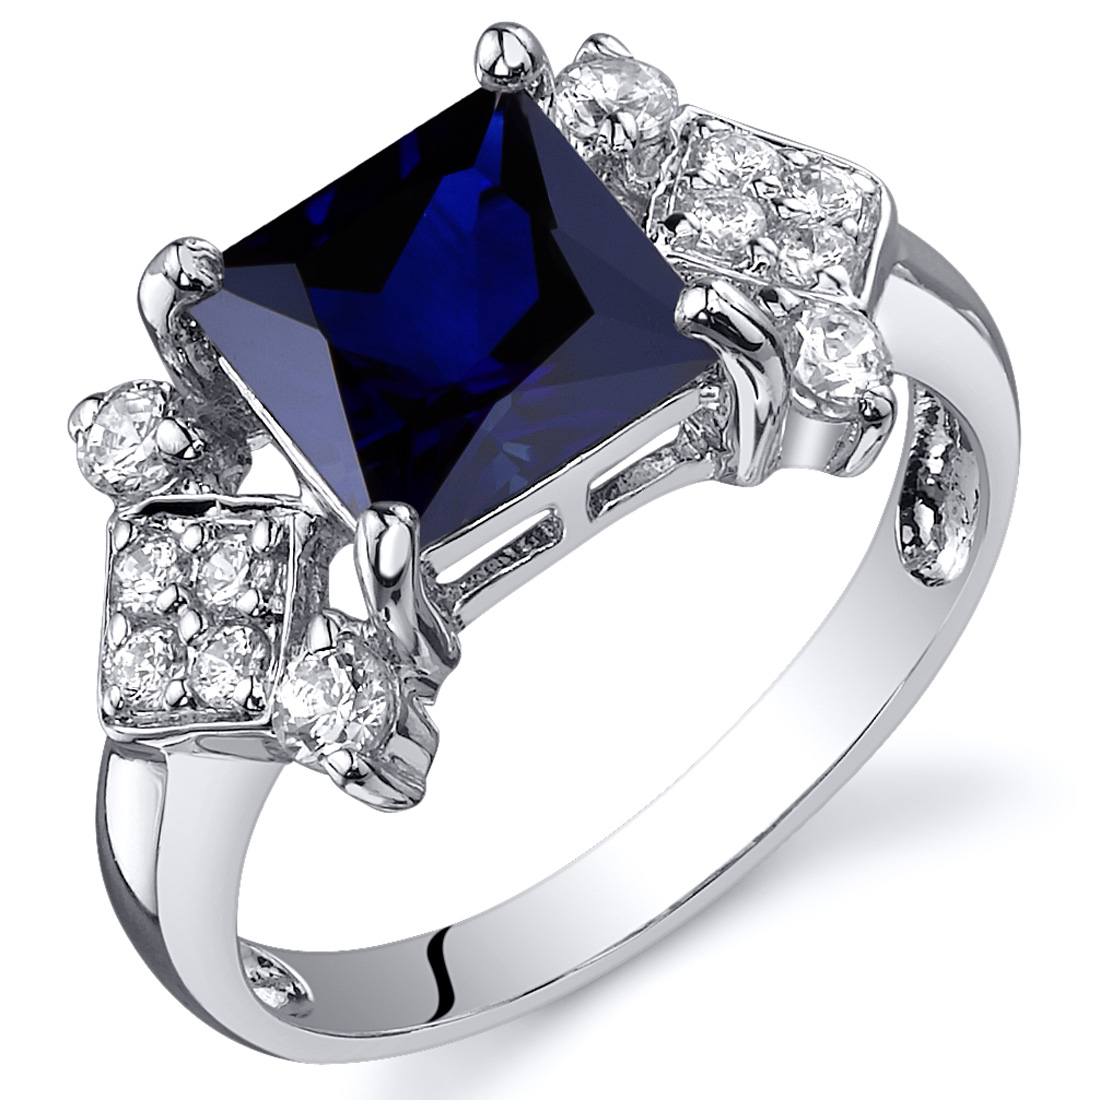 Princess Cut Cts Blue Sapphire Cz Ring Sterling Silver Sizes To